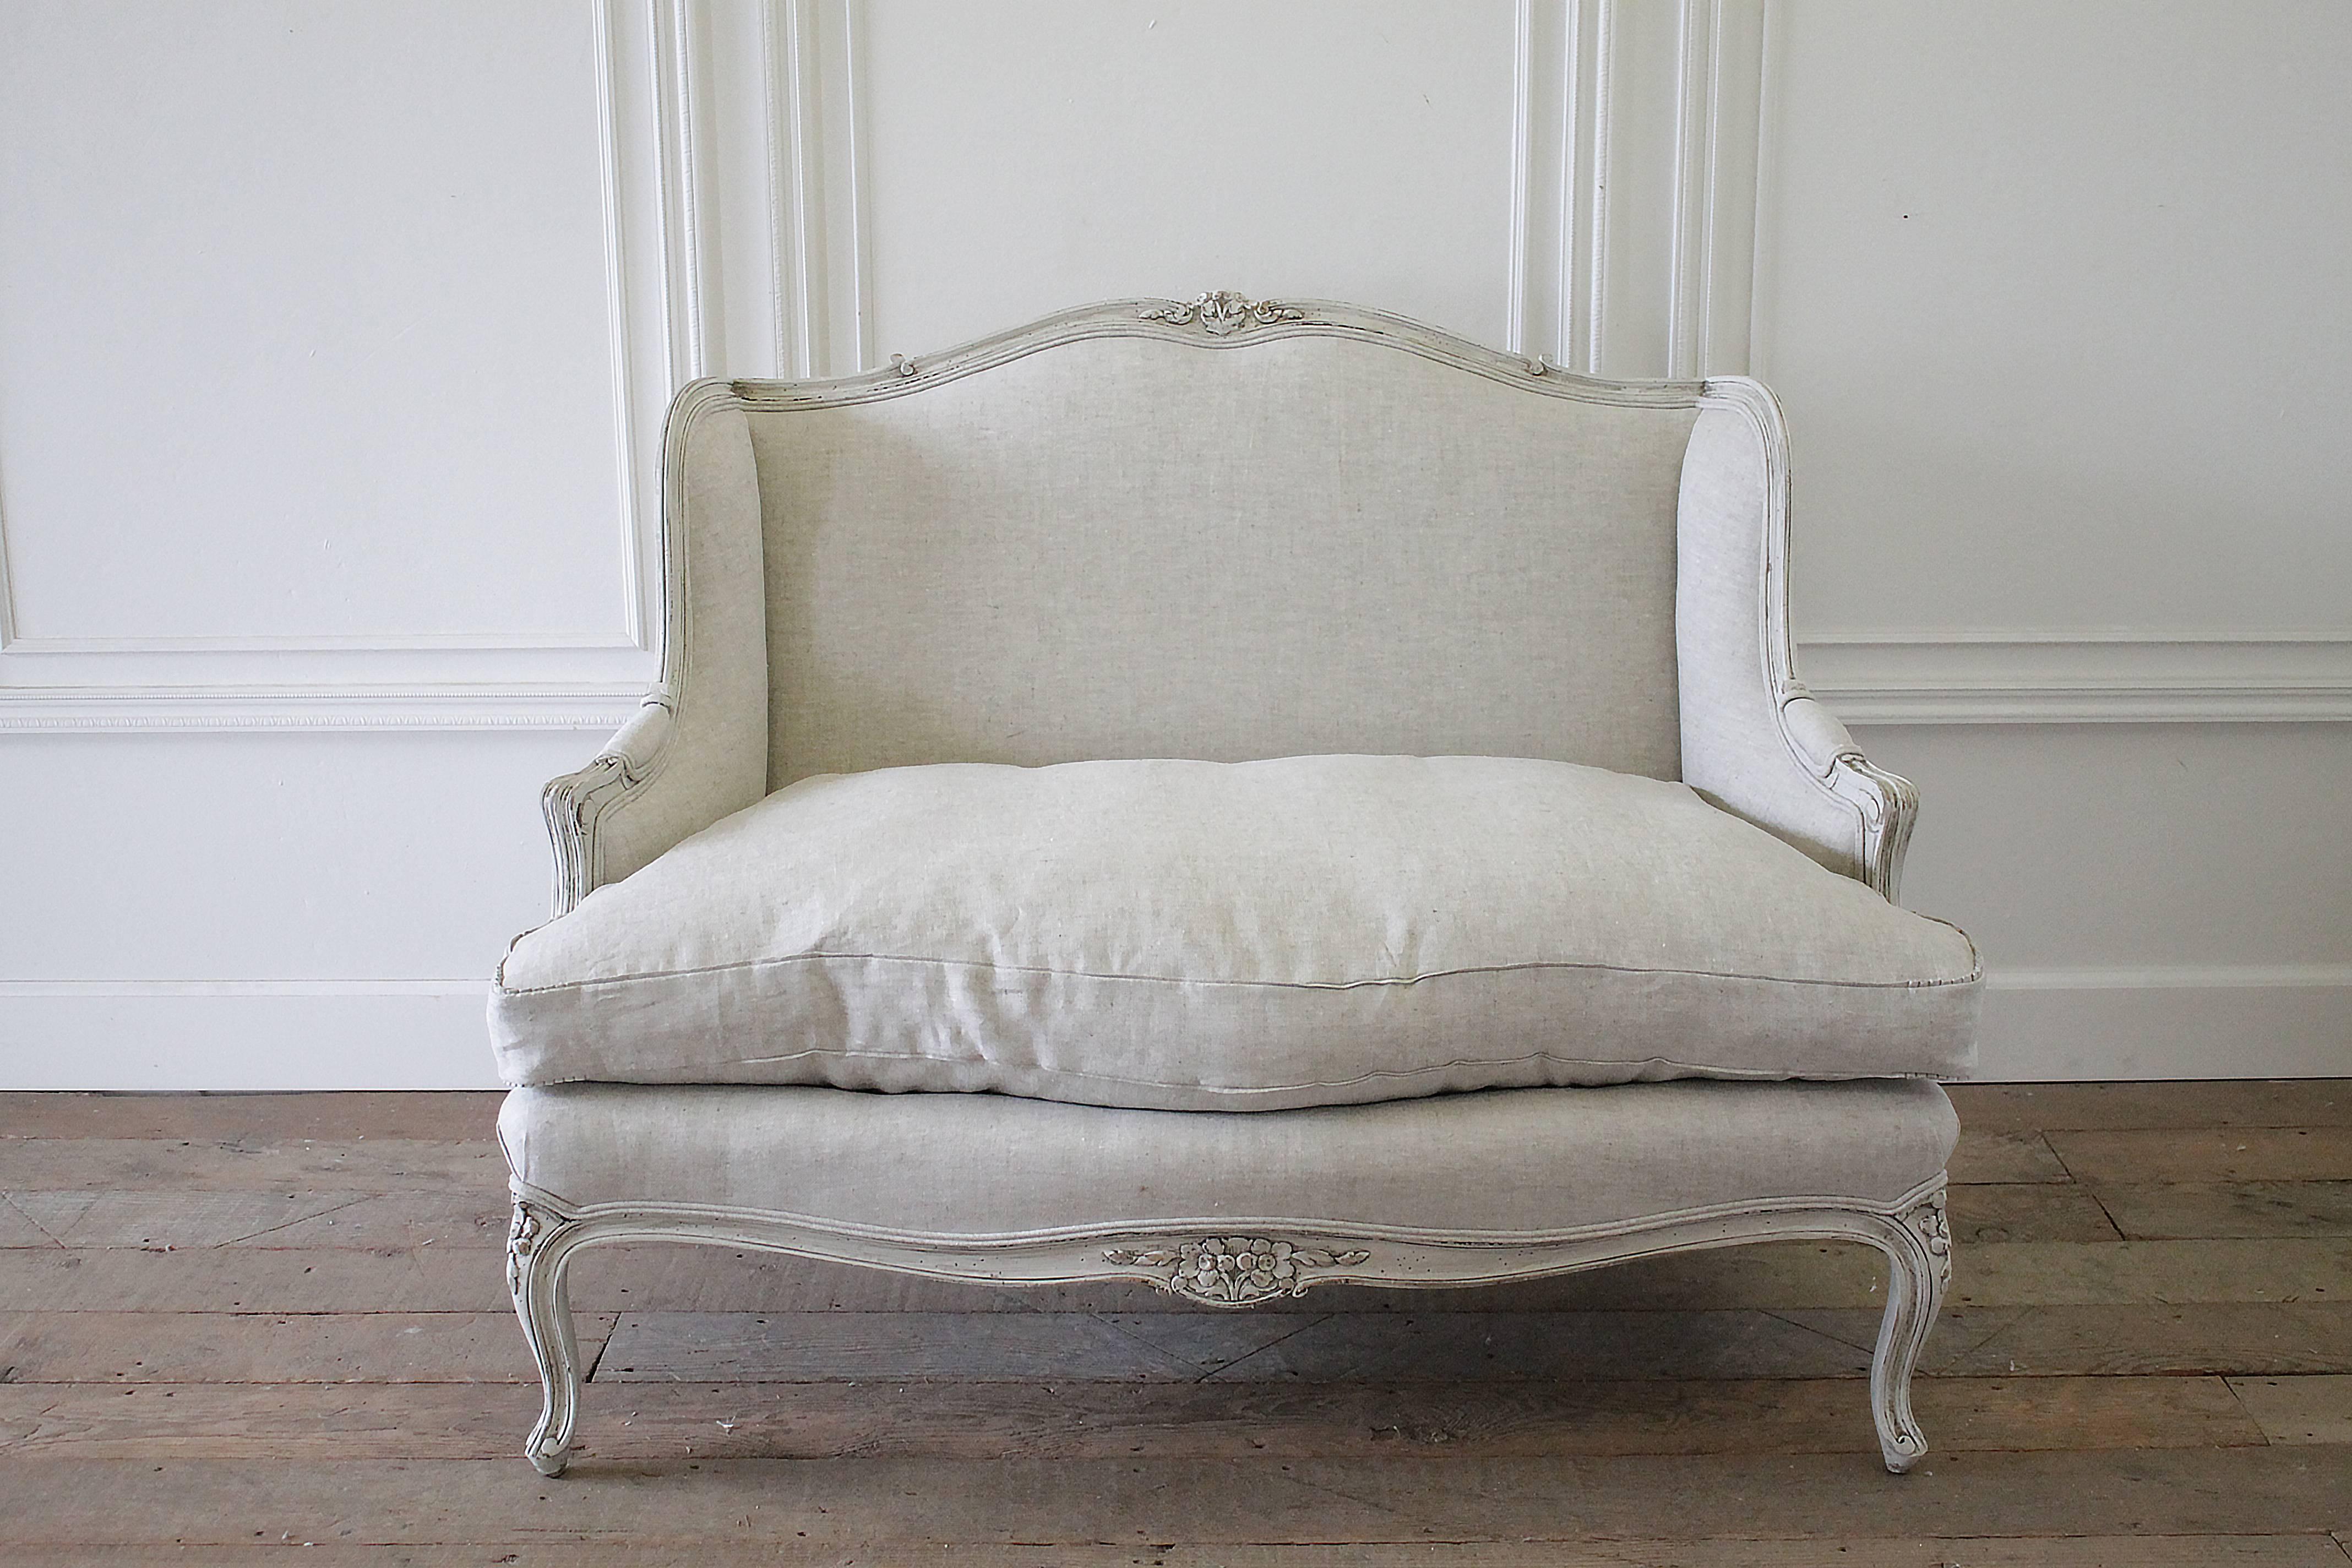 Fabulous country French Provincial settee has been painted in a soft oyster white with subtle distressing and a hand glazed and waxed finish. Louis XV style legs, and carved flowers, add a romantic touch. The settee has been reupholstered in our